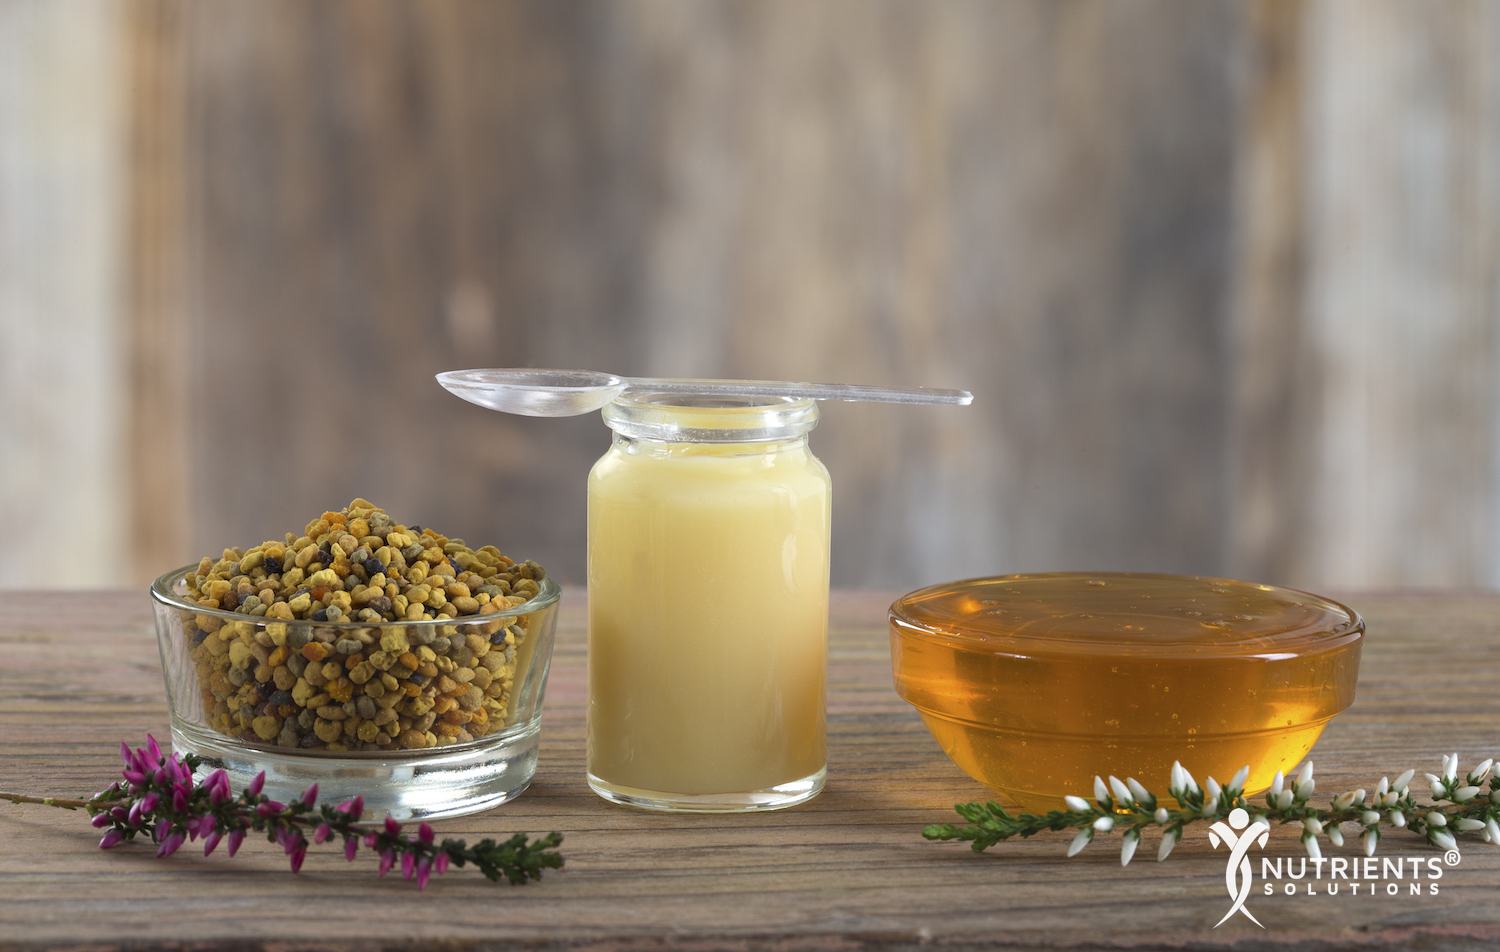 9 Health Benefits of Royal Jelly: a Remedy for Aging, PMS, Allergies and More